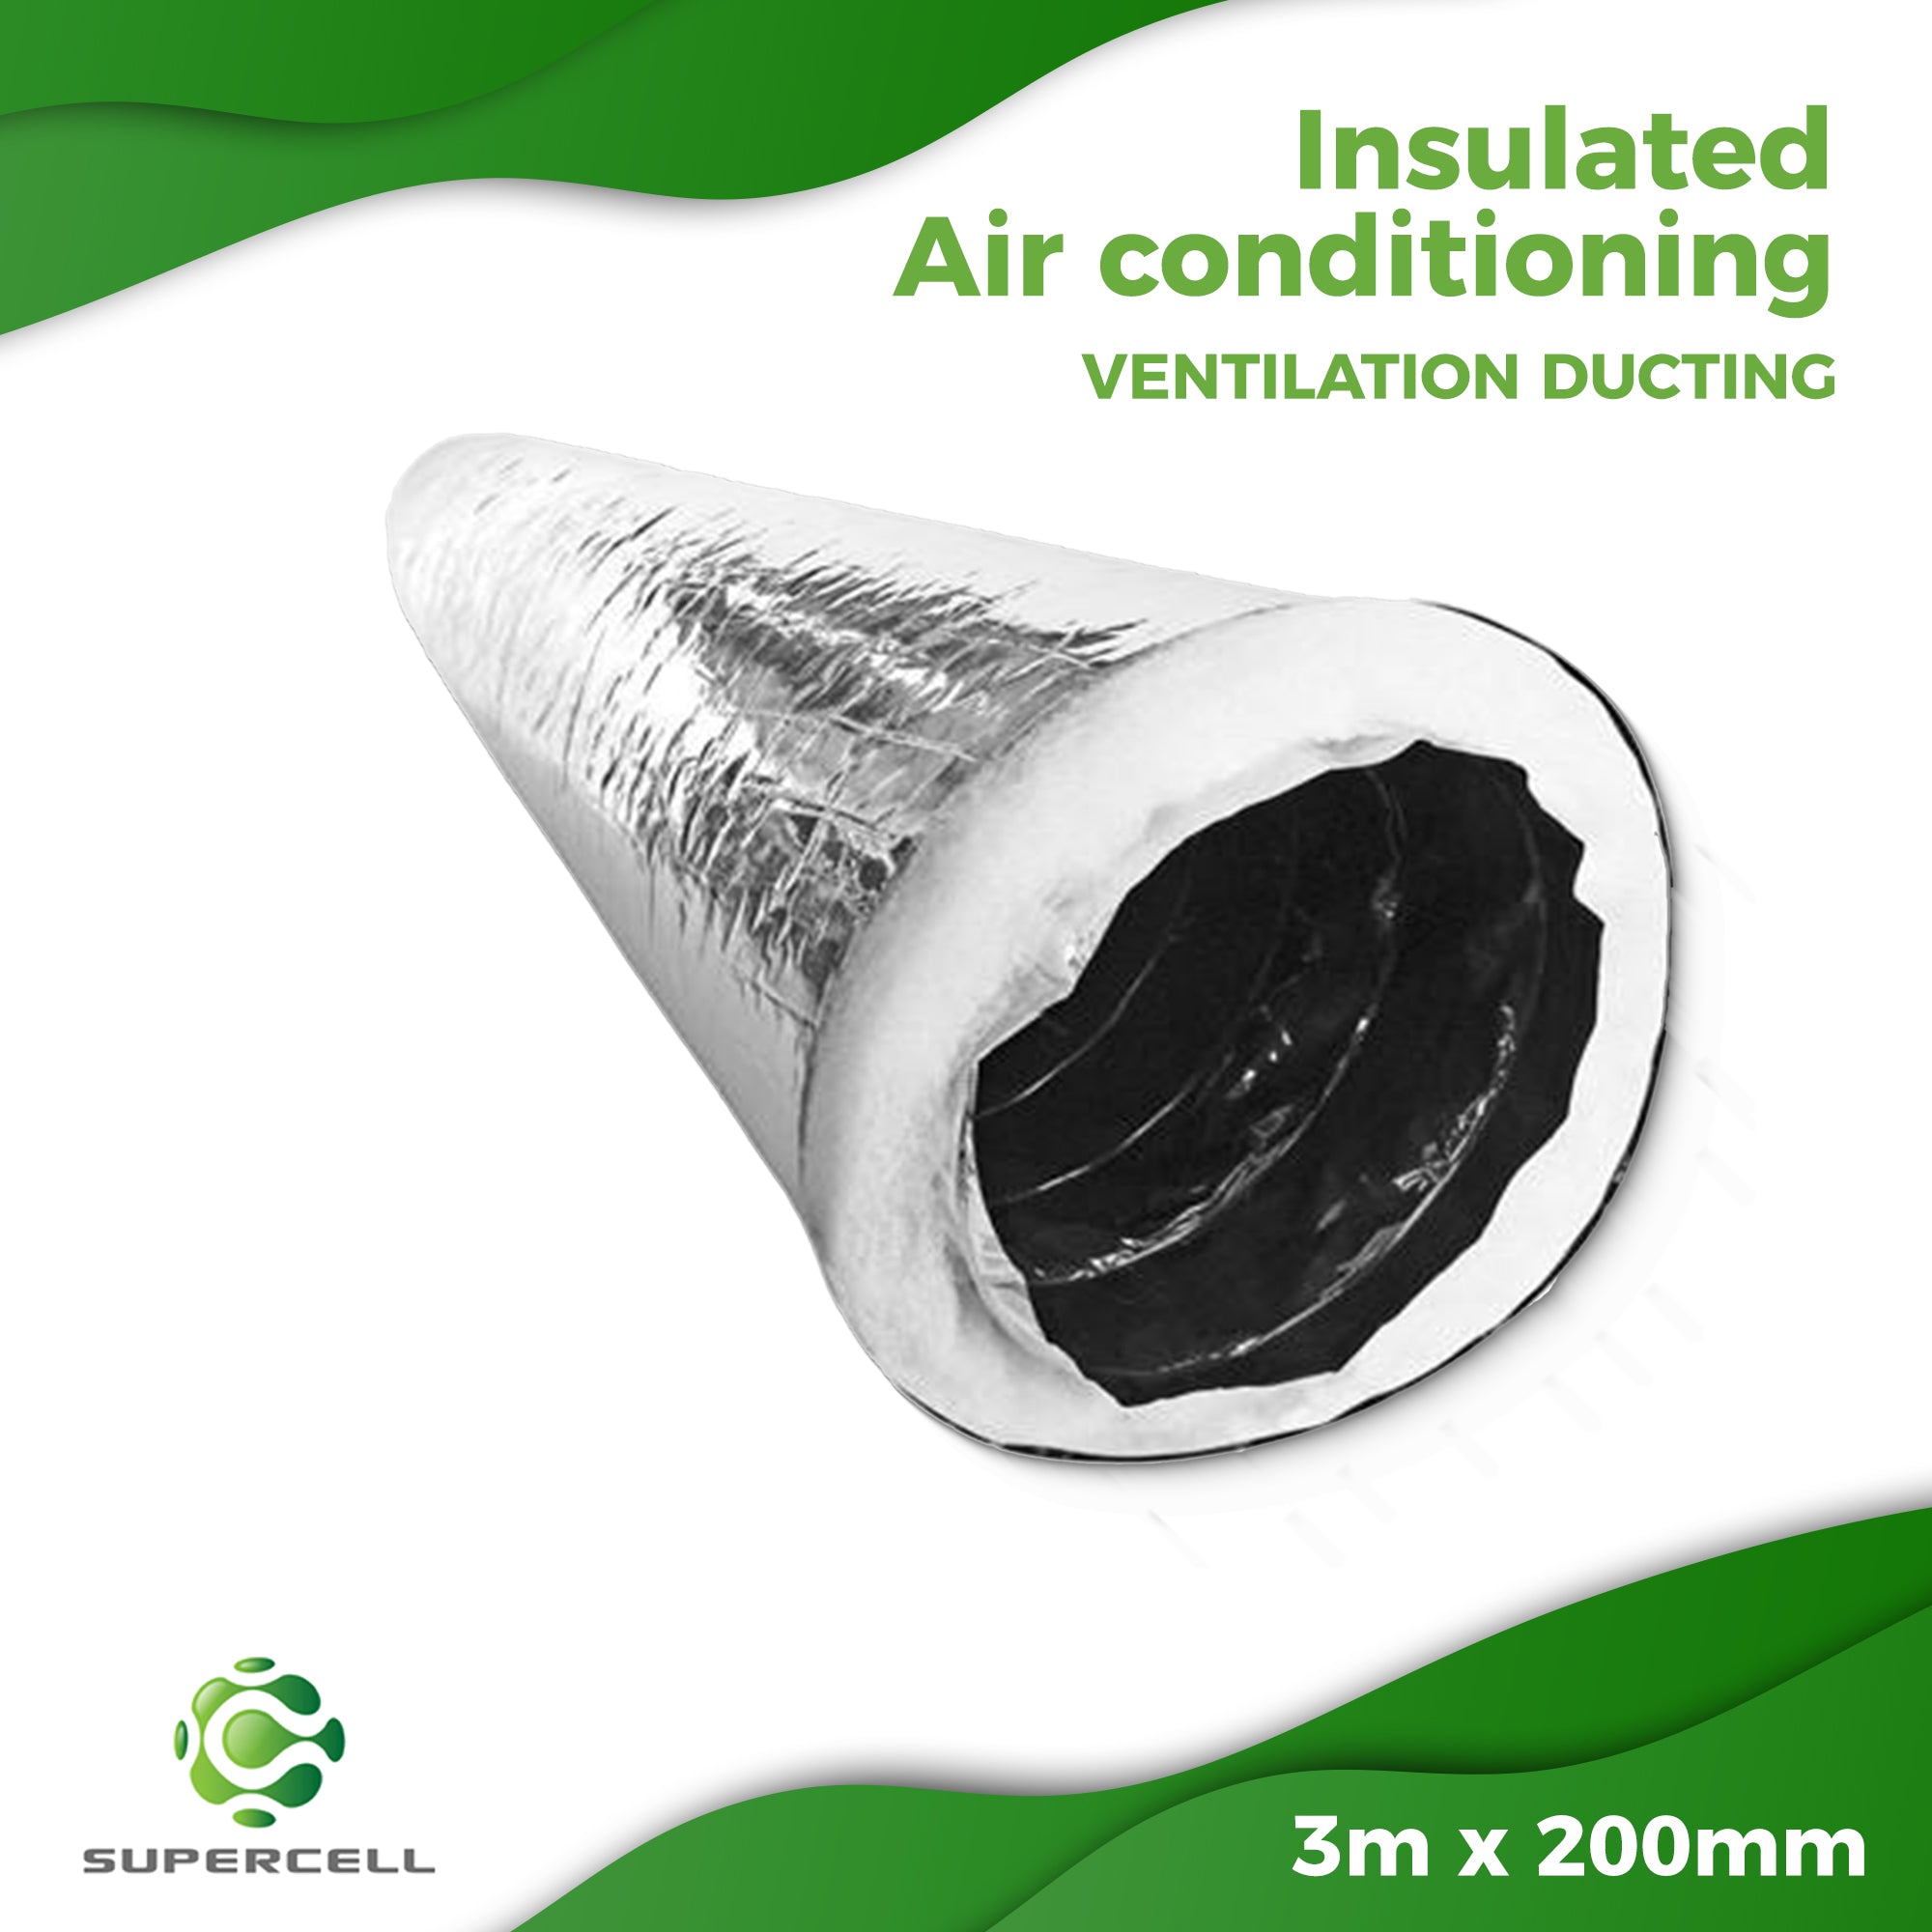 V 3m x 200mm INSULATED  AIR CONDITIONING, VENTILATION DUCTING - supercellnz